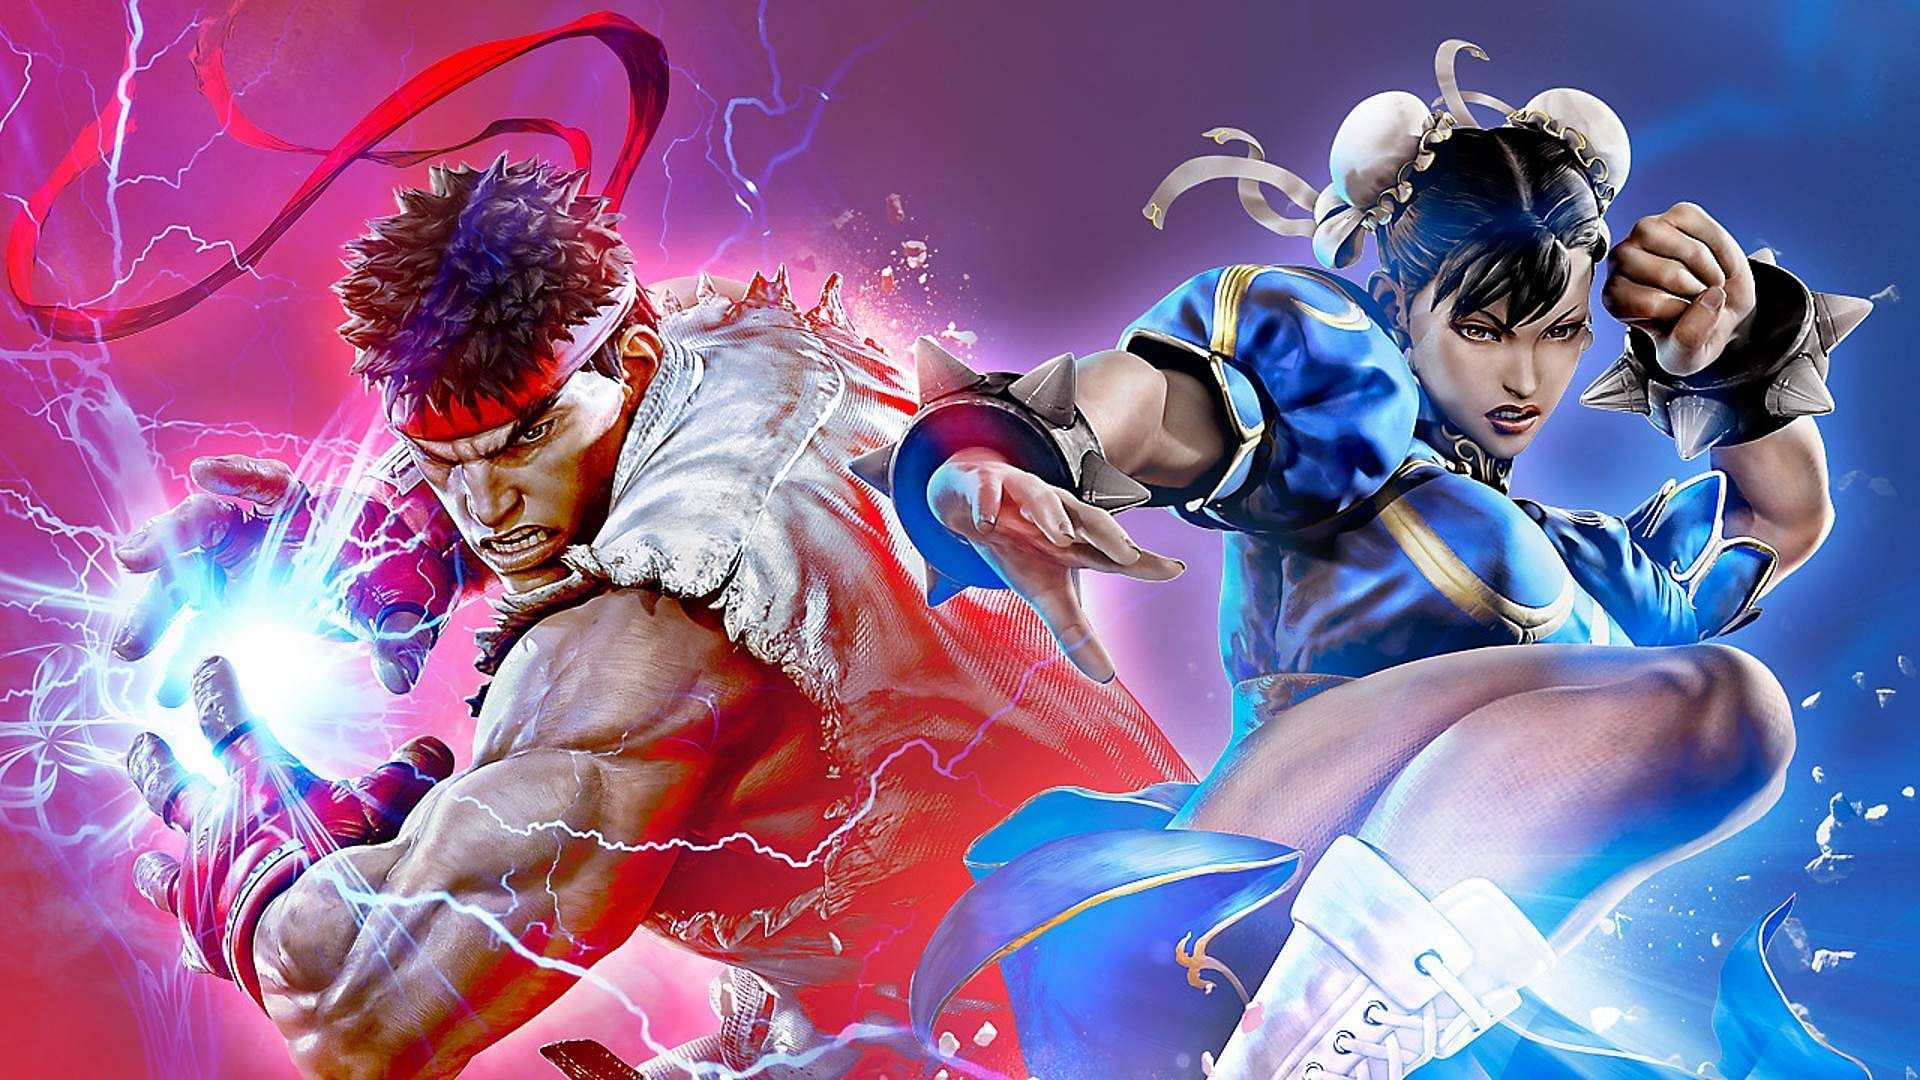 Street Fighter 6 trophies guide, All achievements list & the Platinum